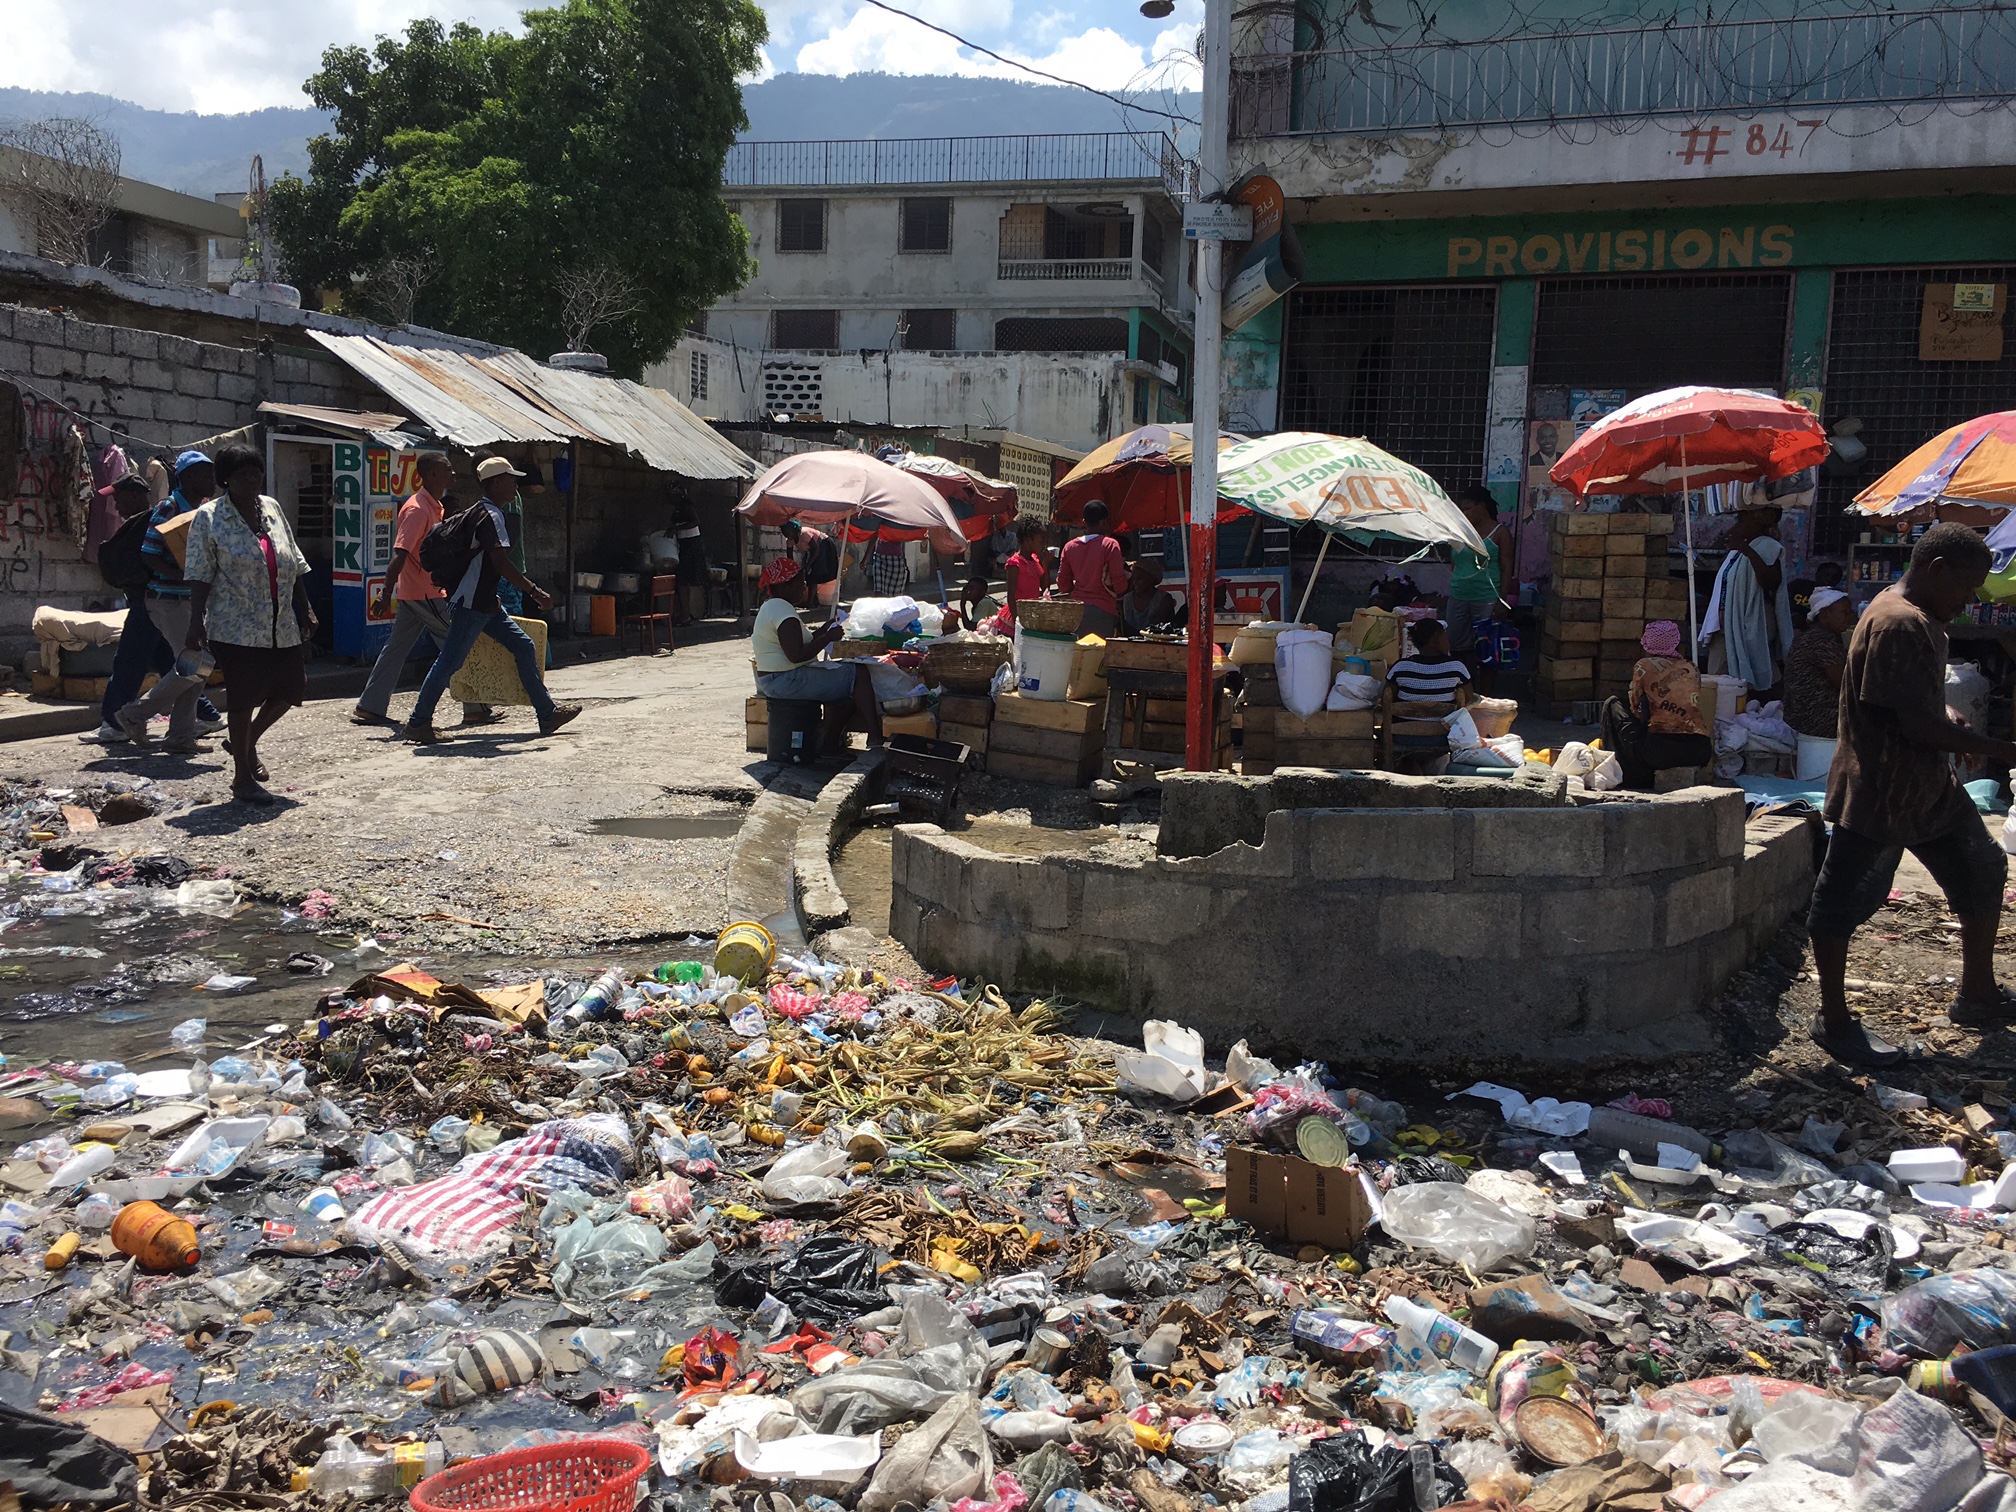 Haitian Street Market in Port-au-Prince, rice from the United States trashed in the gutter